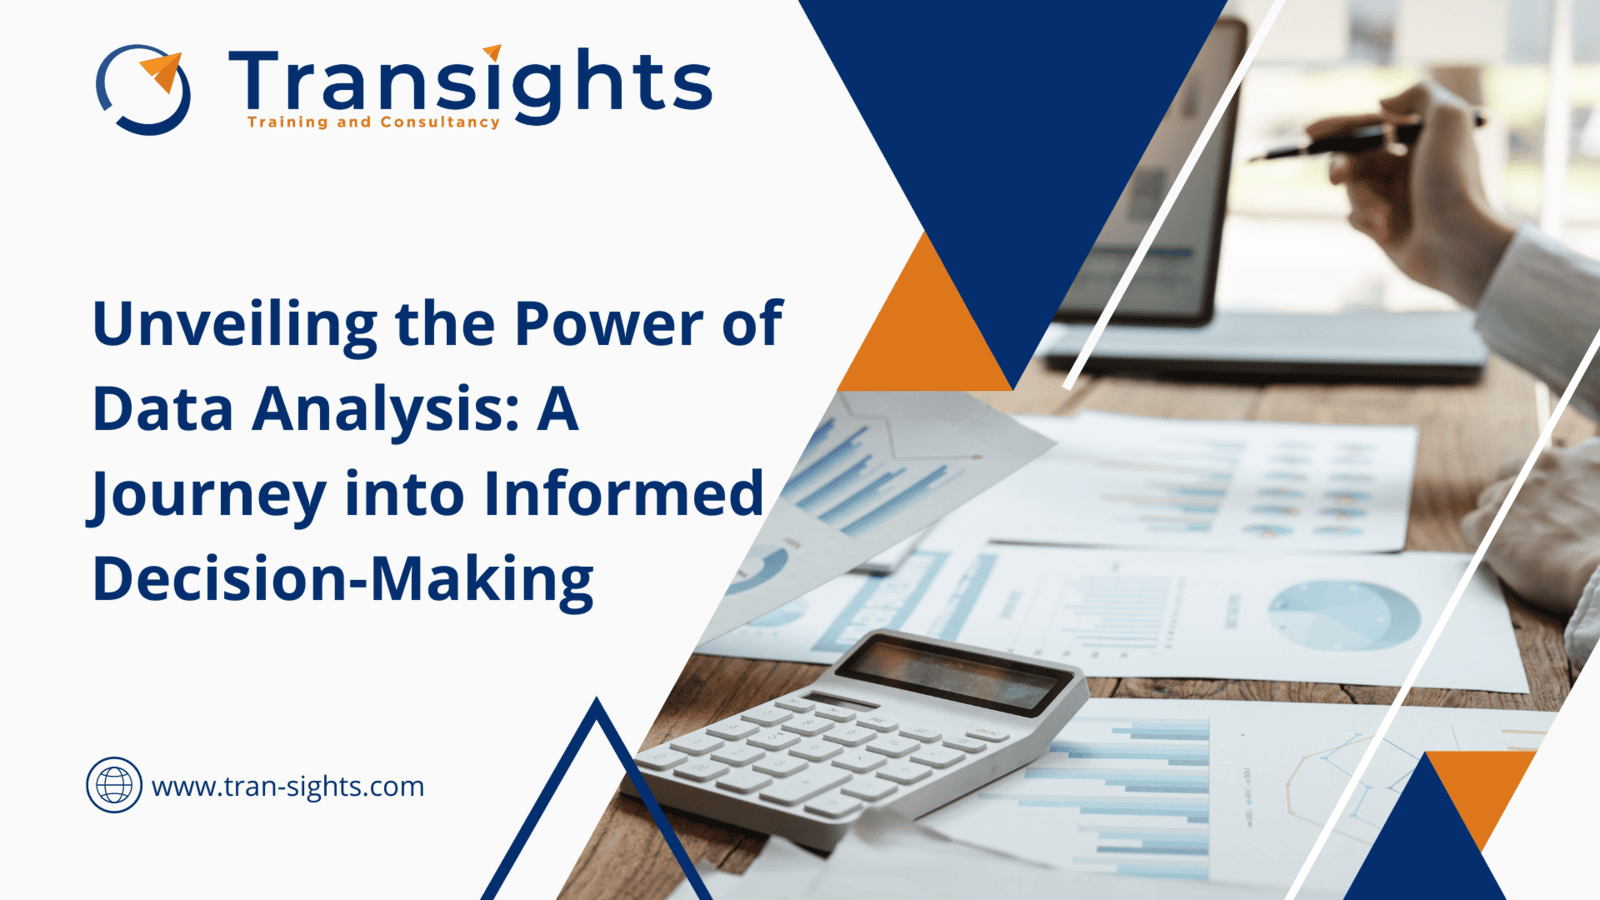 Unveiling the Power of Data Analysis: A Journey into Informed Decision-Making